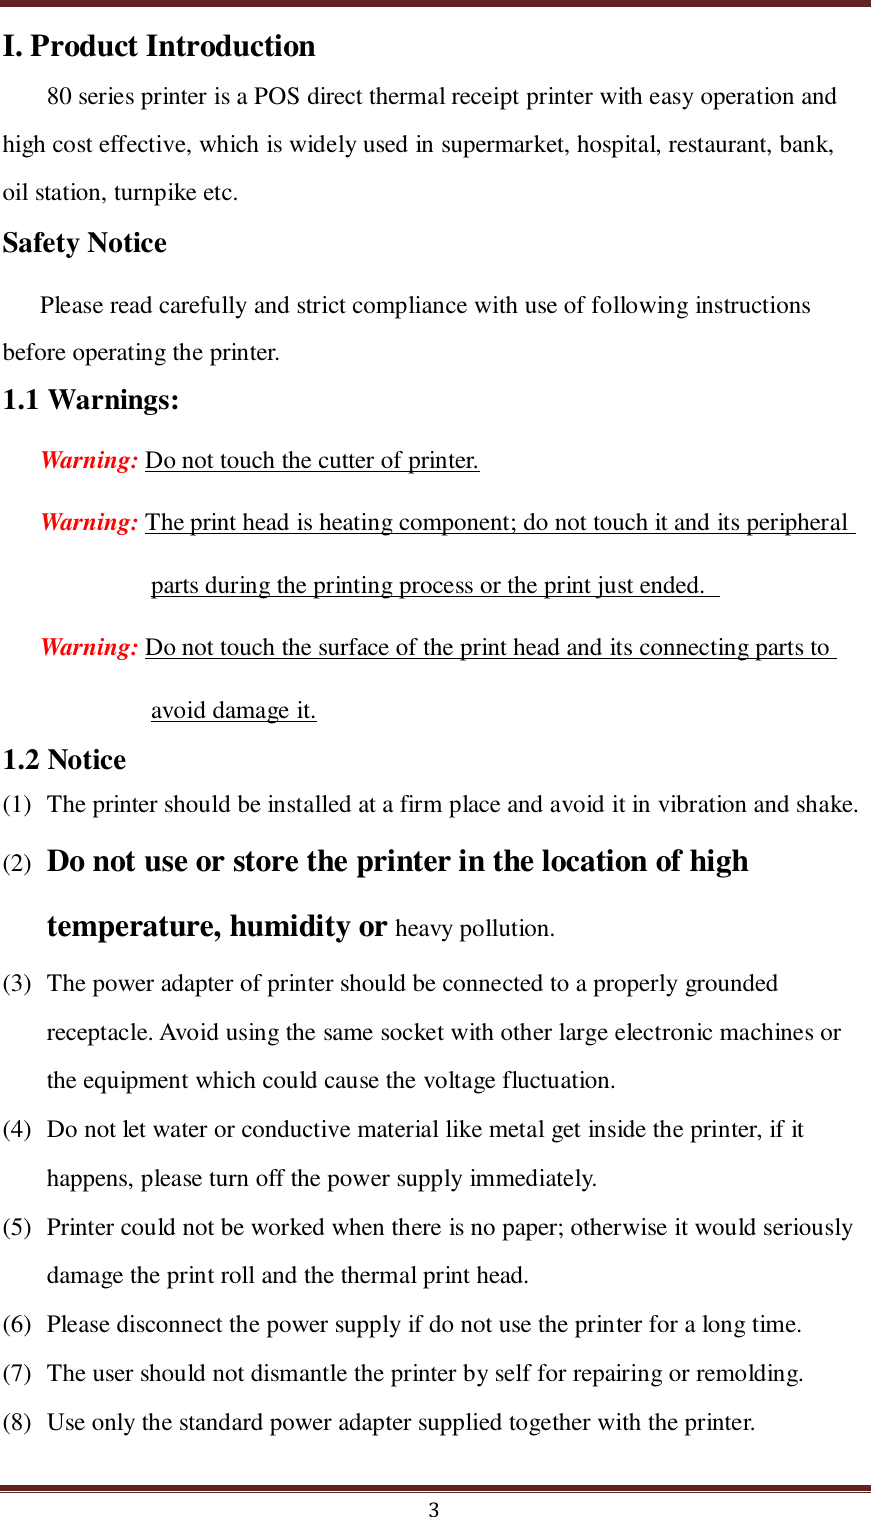  3 I. Product Introduction 80 series printer is a POS direct thermal receipt printer with easy operation and high cost effective, which is widely used in supermarket, hospital, restaurant, bank, oil station, turnpike etc. Safety Notice Please read carefully and strict compliance with use of following instructions before operating the printer. 1.1 Warnings: Warning: Do not touch the cutter of printer. Warning: The print head is heating component; do not touch it and its peripheral parts during the printing process or the print just ended.   Warning: Do not touch the surface of the print head and its connecting parts to avoid damage it. 1.2 Notice (1) The printer should be installed at a firm place and avoid it in vibration and shake.     (2) Do not use or store the printer in the location of high temperature, humidity or heavy pollution. (3) The power adapter of printer should be connected to a properly grounded receptacle. Avoid using the same socket with other large electronic machines or the equipment which could cause the voltage fluctuation.   (4) Do not let water or conductive material like metal get inside the printer, if it happens, please turn off the power supply immediately.   (5) Printer could not be worked when there is no paper; otherwise it would seriously damage the print roll and the thermal print head. (6) Please disconnect the power supply if do not use the printer for a long time.   (7) The user should not dismantle the printer by self for repairing or remolding. (8) Use only the standard power adapter supplied together with the printer. 